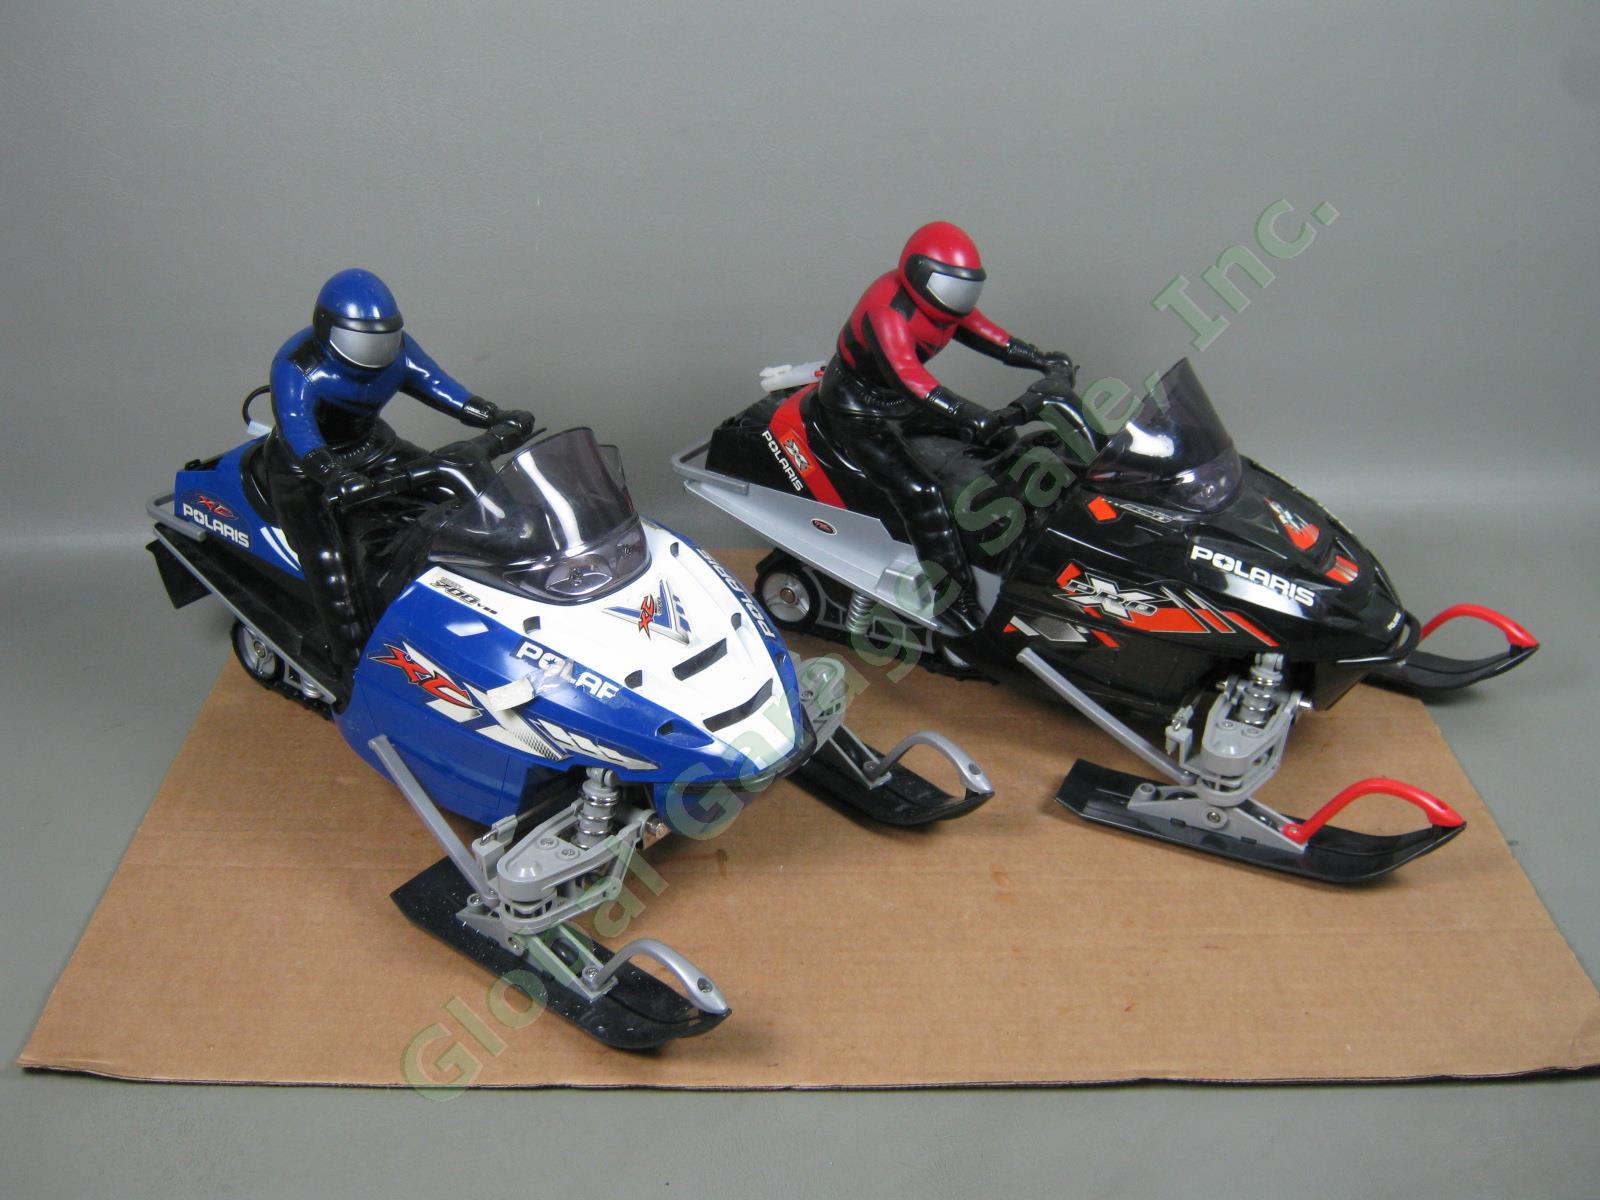 2 Polaris RC Remote Control Snowmobile Lot Liberty 550 Pro X 700 XC Tested As-Is 2